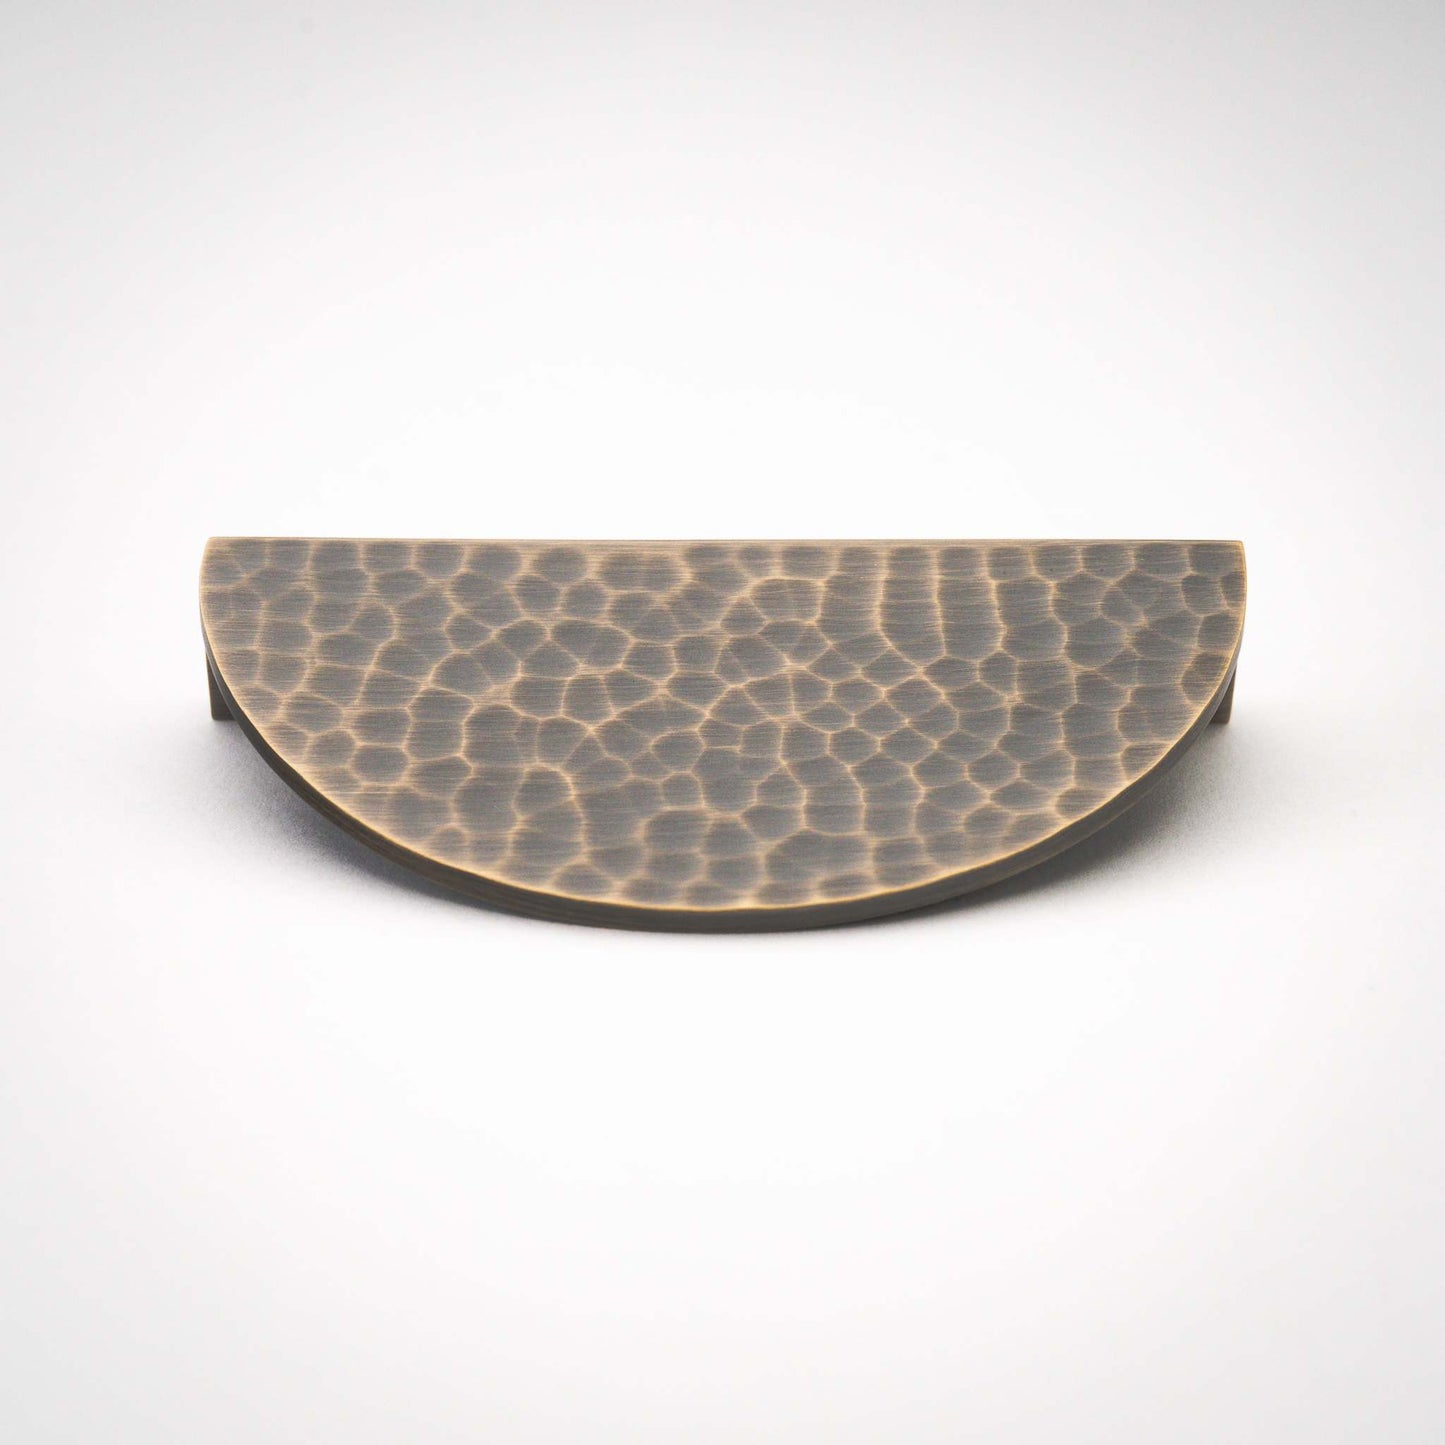 Hammered Demi Lune, Solid Brass Half Moon Cabinet PullsThis Demi Lune Hammered Pull is crafted from solid brass and finished with a unique hammered texture. With its half-moon shape, it's a charming addition to any kitchpullHammered Demi Lune, Solid Brass Half Moon Pulls